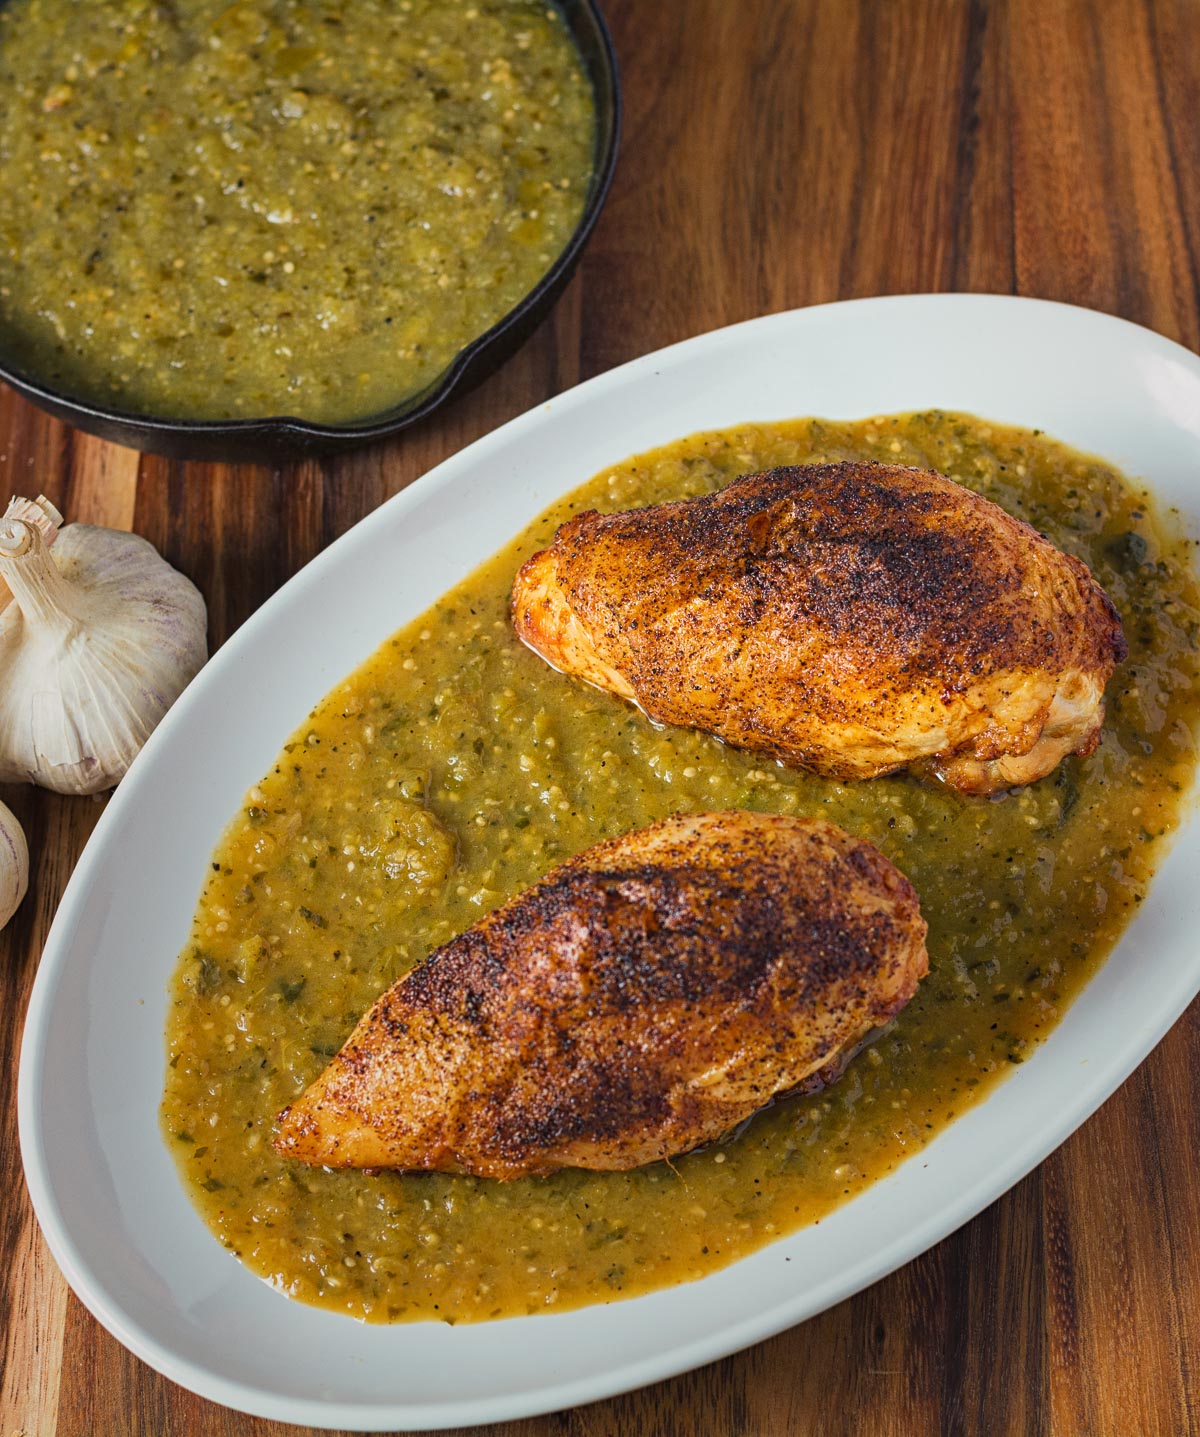 Chicken with tomatillo sauce is a bright, mexican inspired dish that pairs well with pureed pinto beans. It can also be shredded for tacos or burritos.